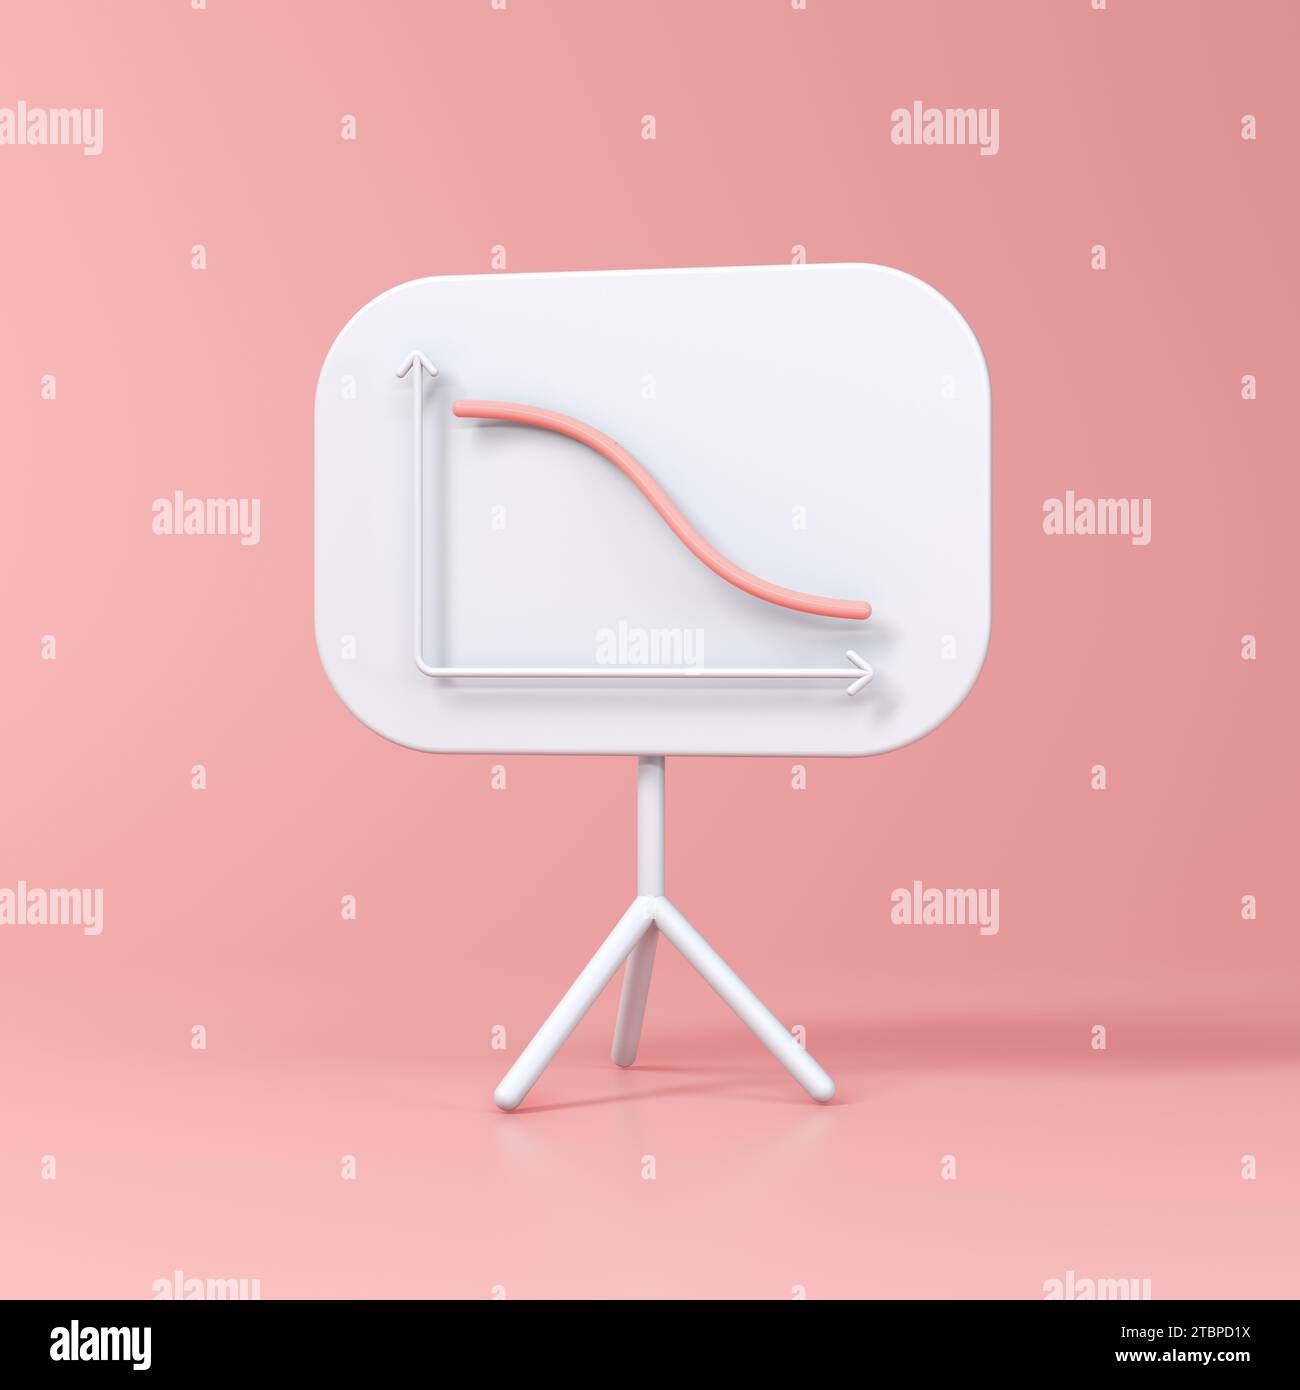 Down Graph Red Line on White Board Isolated Over Soft Red Background. Cartoon Minimalism Style. Business Concept. 3D Render Illustration. Stock Photo